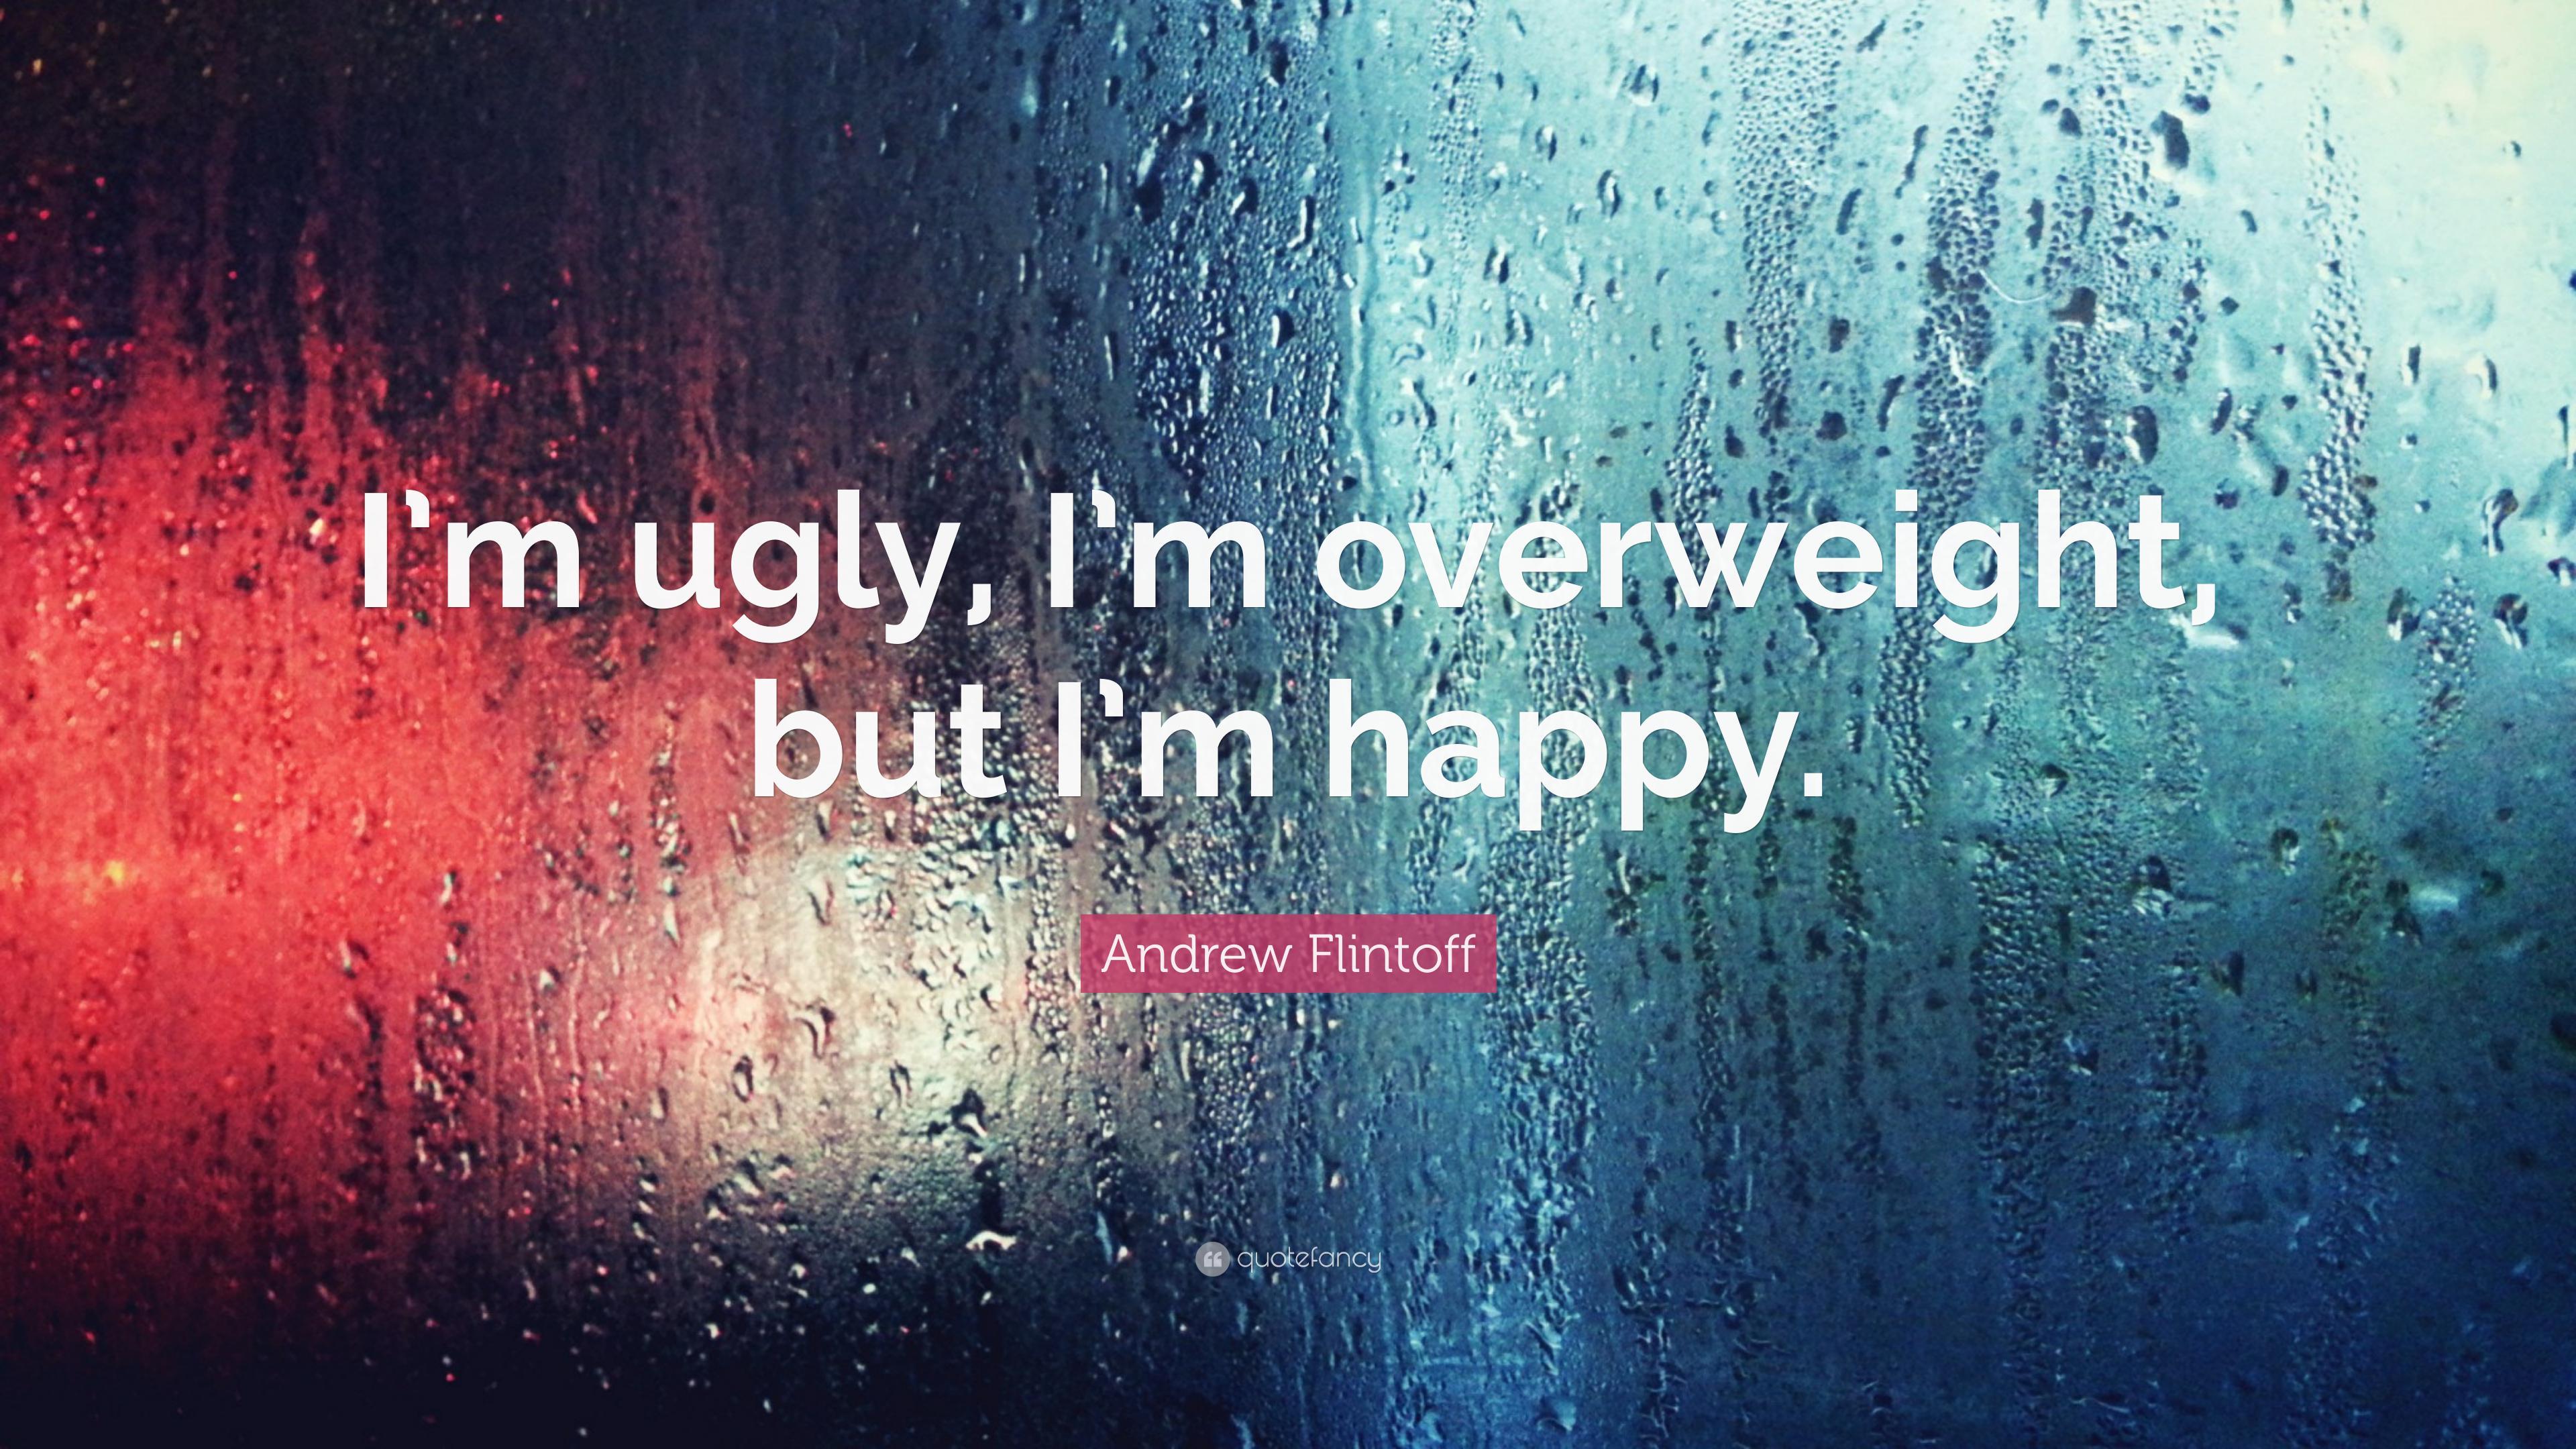 Andrew Flintoff Quote: “I'm ugly, I'm overweight, but I'm